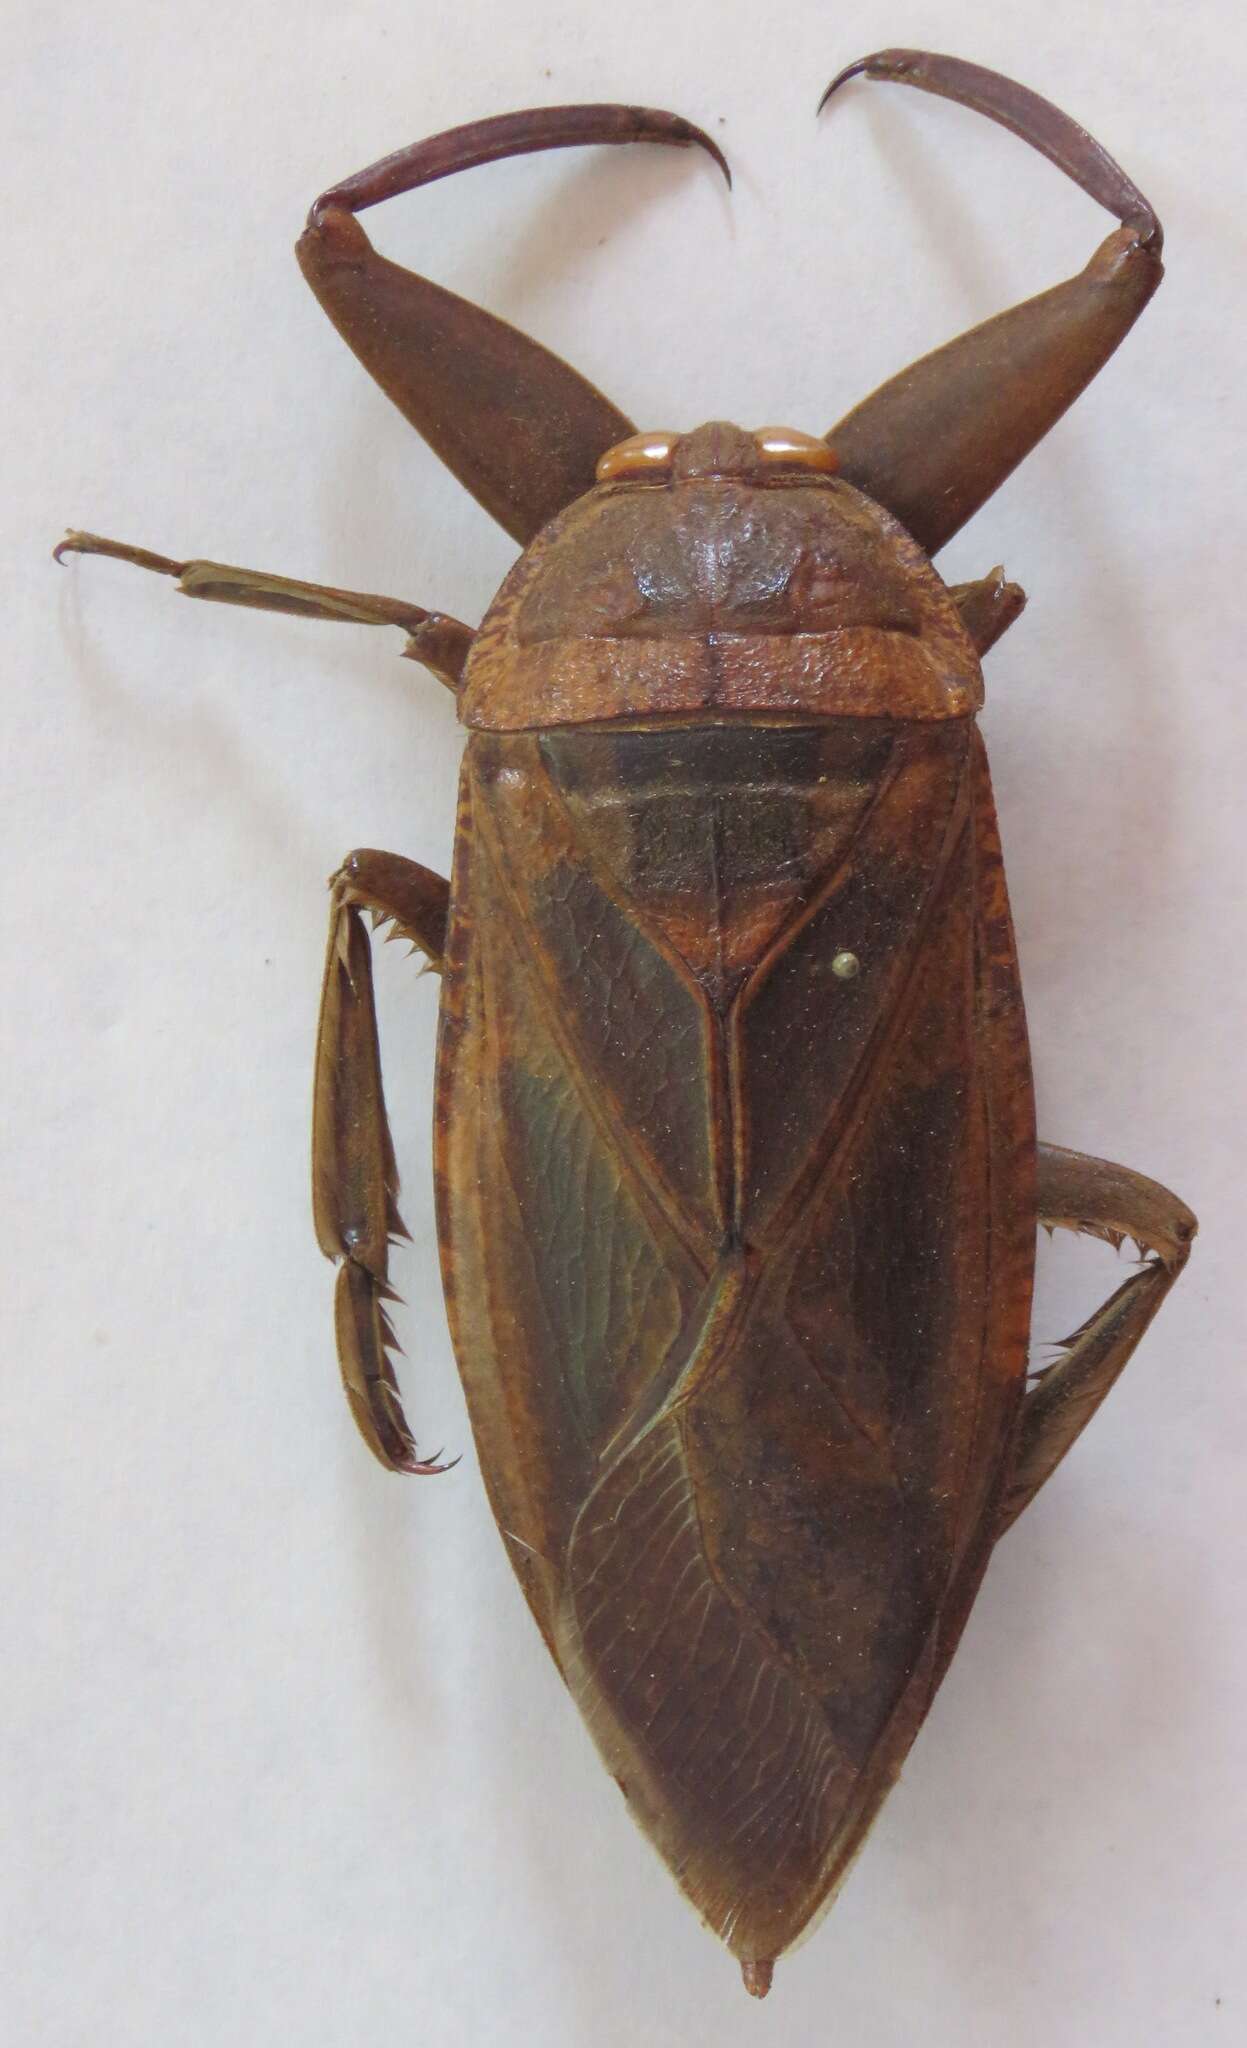 Image of Lethocerus collossicus (Stål 1855)